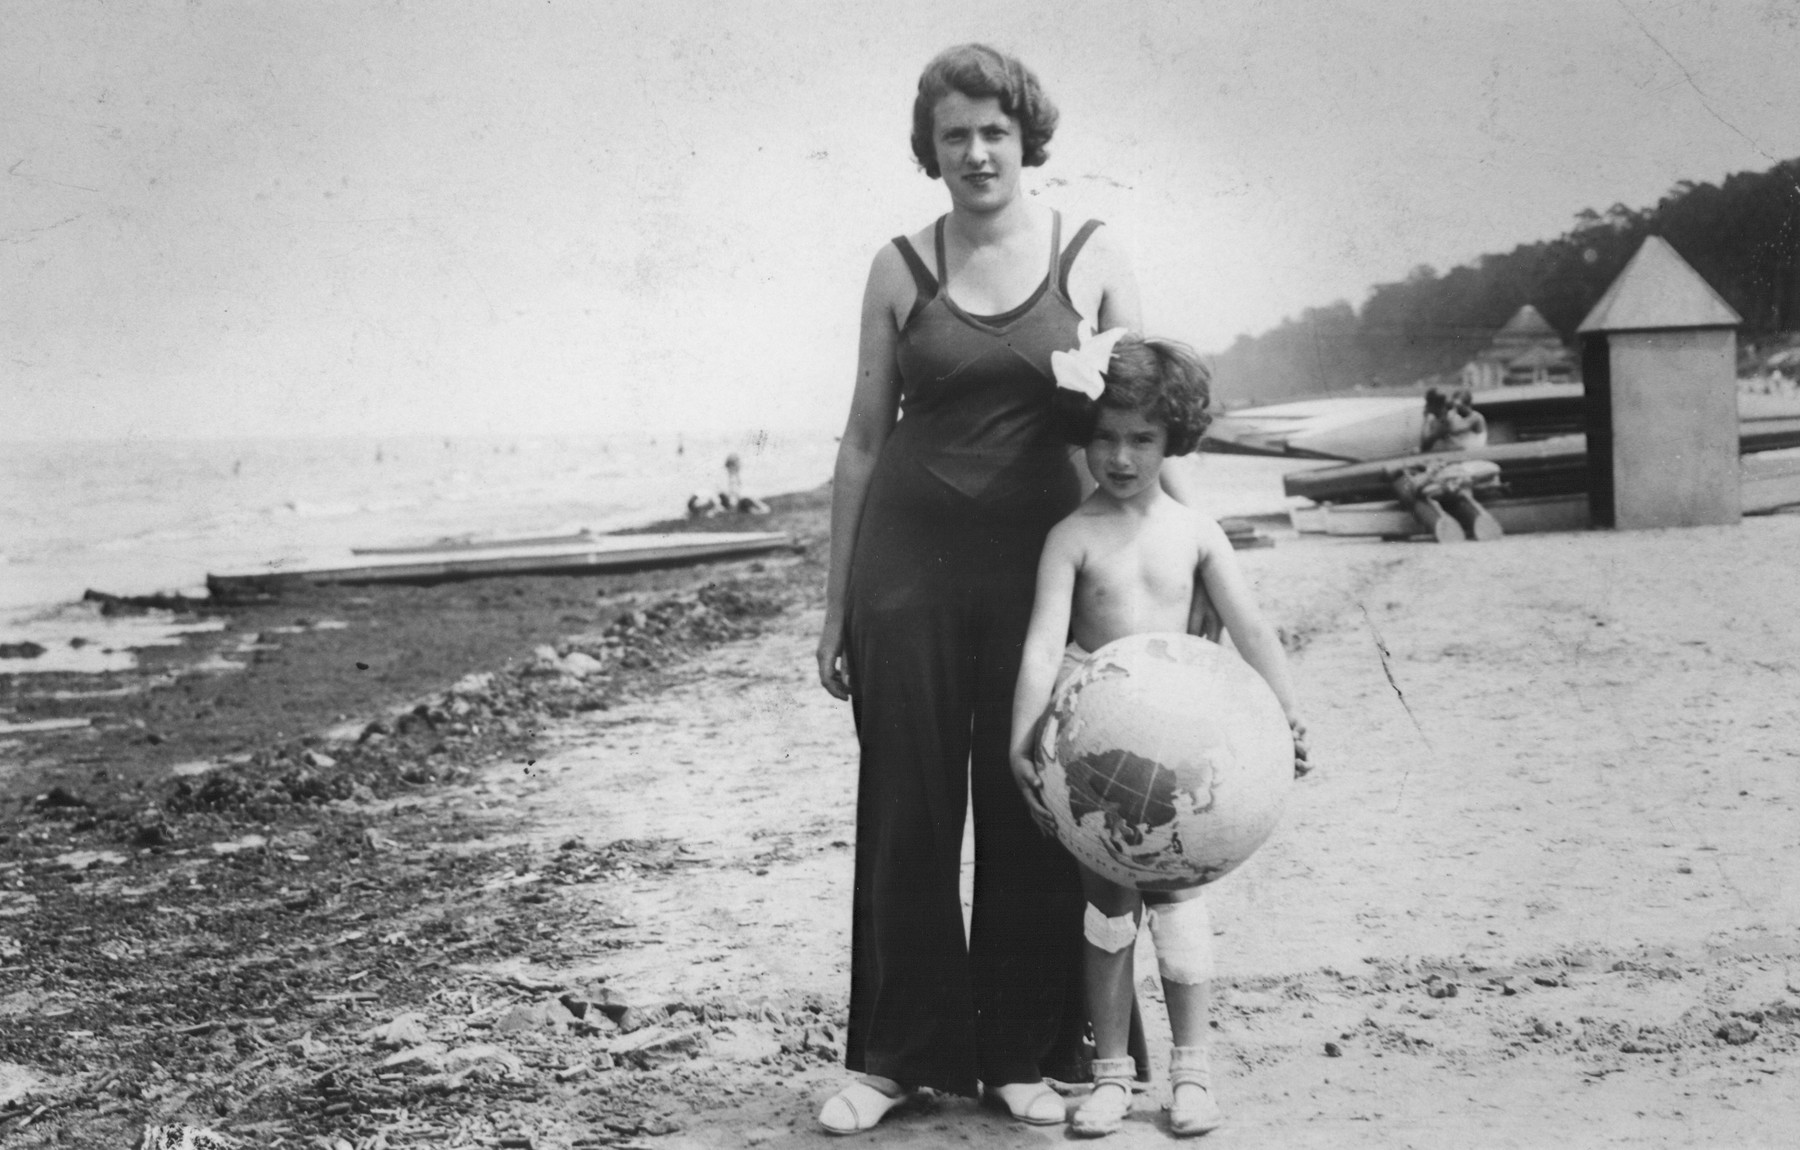 A young Jewish child holding a beach ball painted like a globe, poses with her mother on a beach, probably in Lithuania.

Pictured are Mira Jedwabnik and her mother, Lydia.